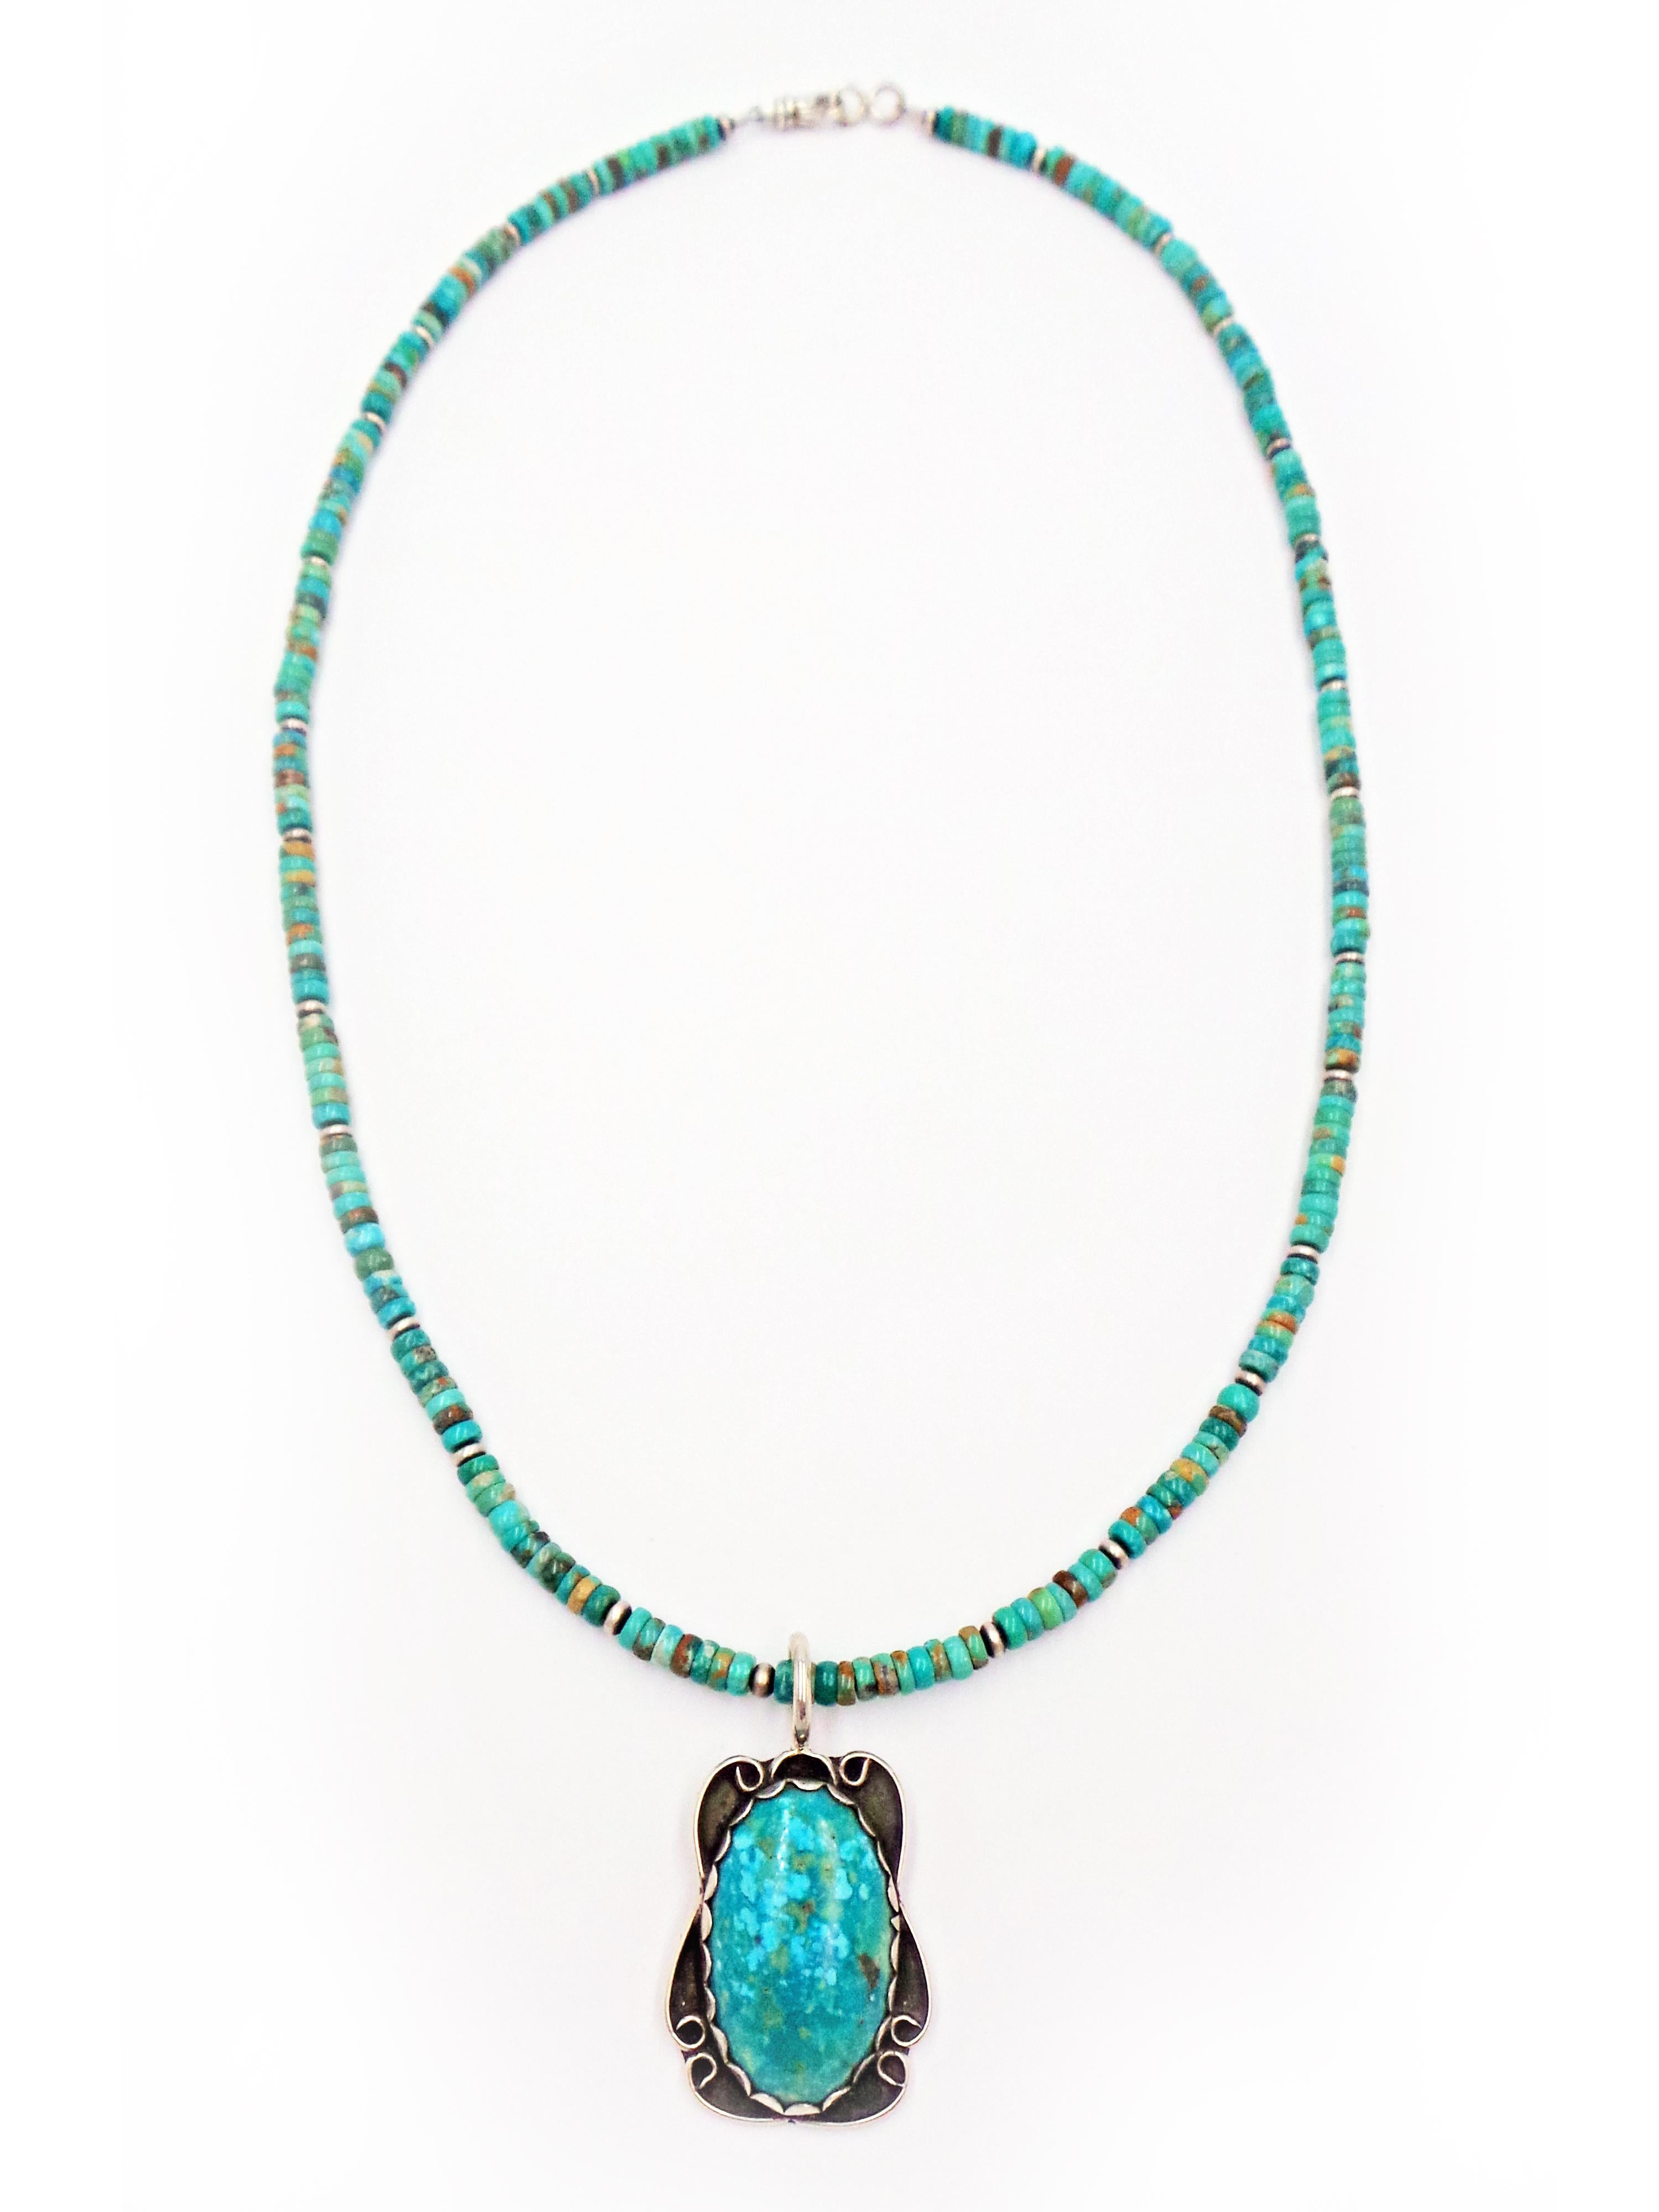 Beautiful Old Pawn Carico Lake Turquoise pendant with contemporary added bail on Fox Turquoise and small Navajo Pearl beaded necklace. Pendant bail is large enough to be removed from beaded necklace, and worn on on your own chain or leather cord.